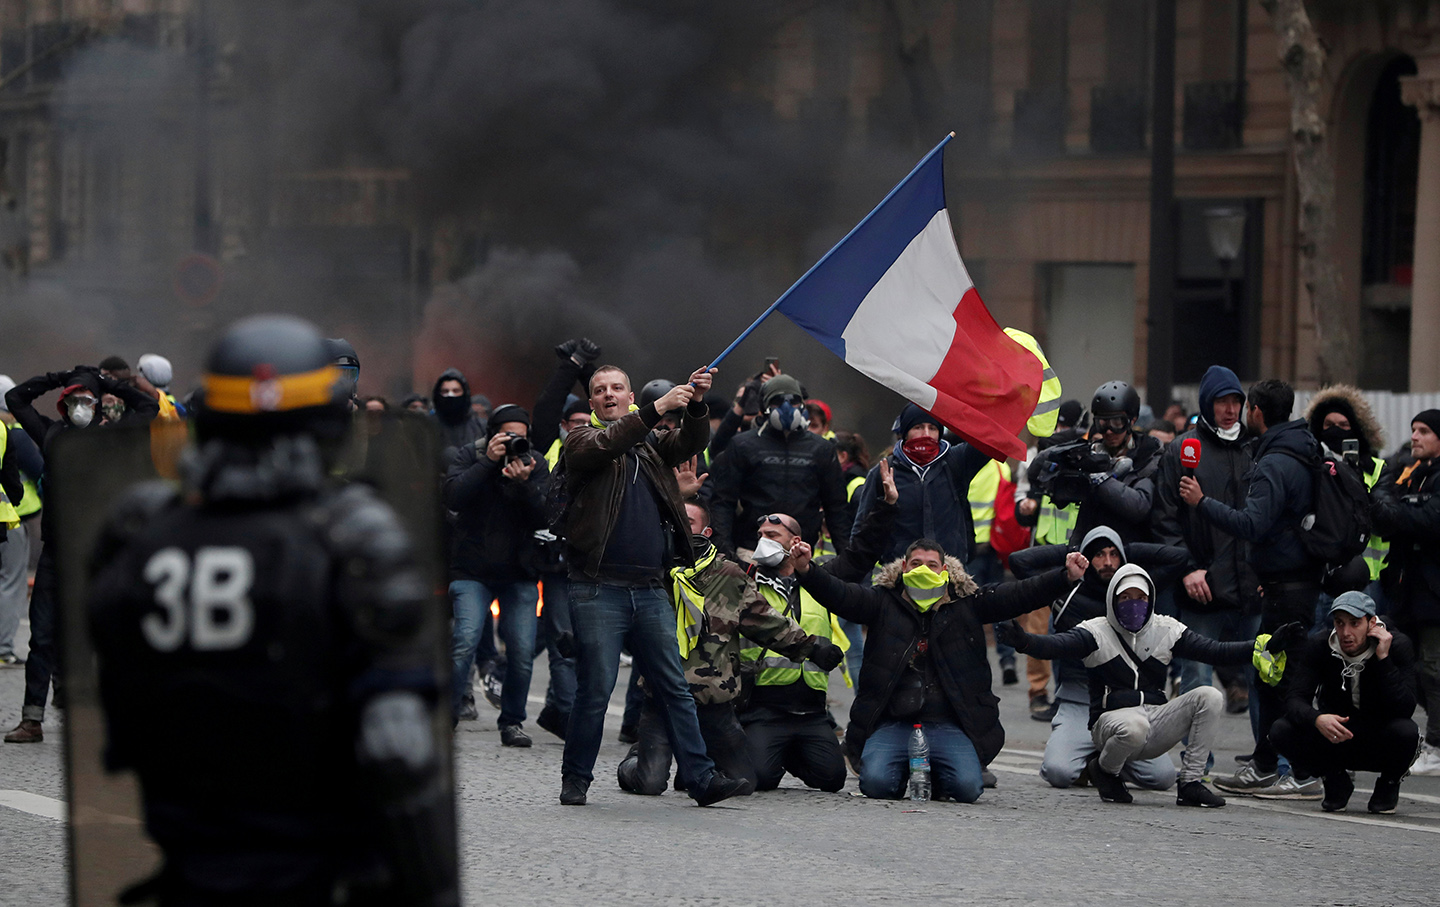 A protester waves a French flag during clashes with police at a demonstration by the 